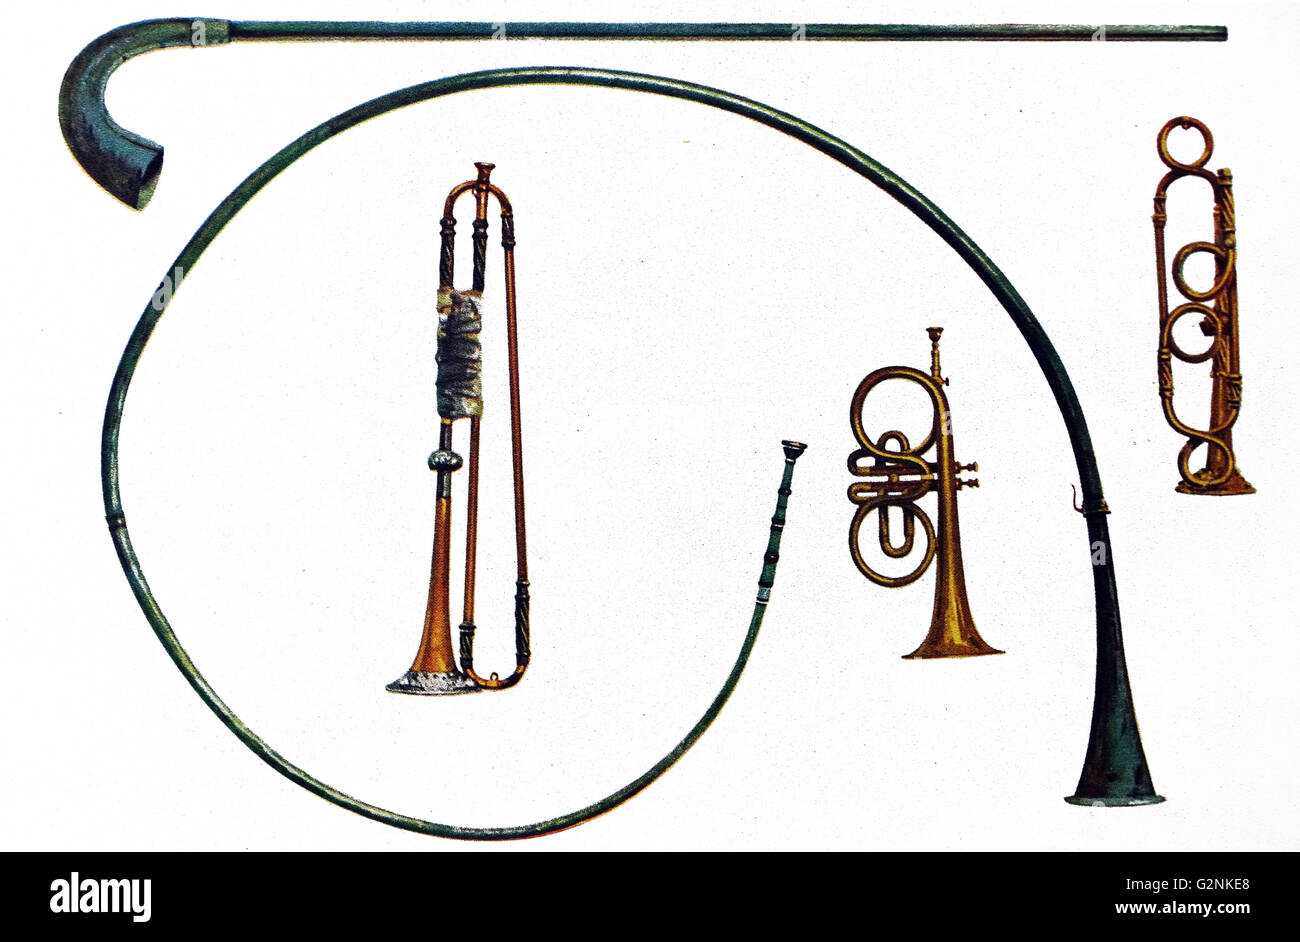 Different types of Roman musical instruments